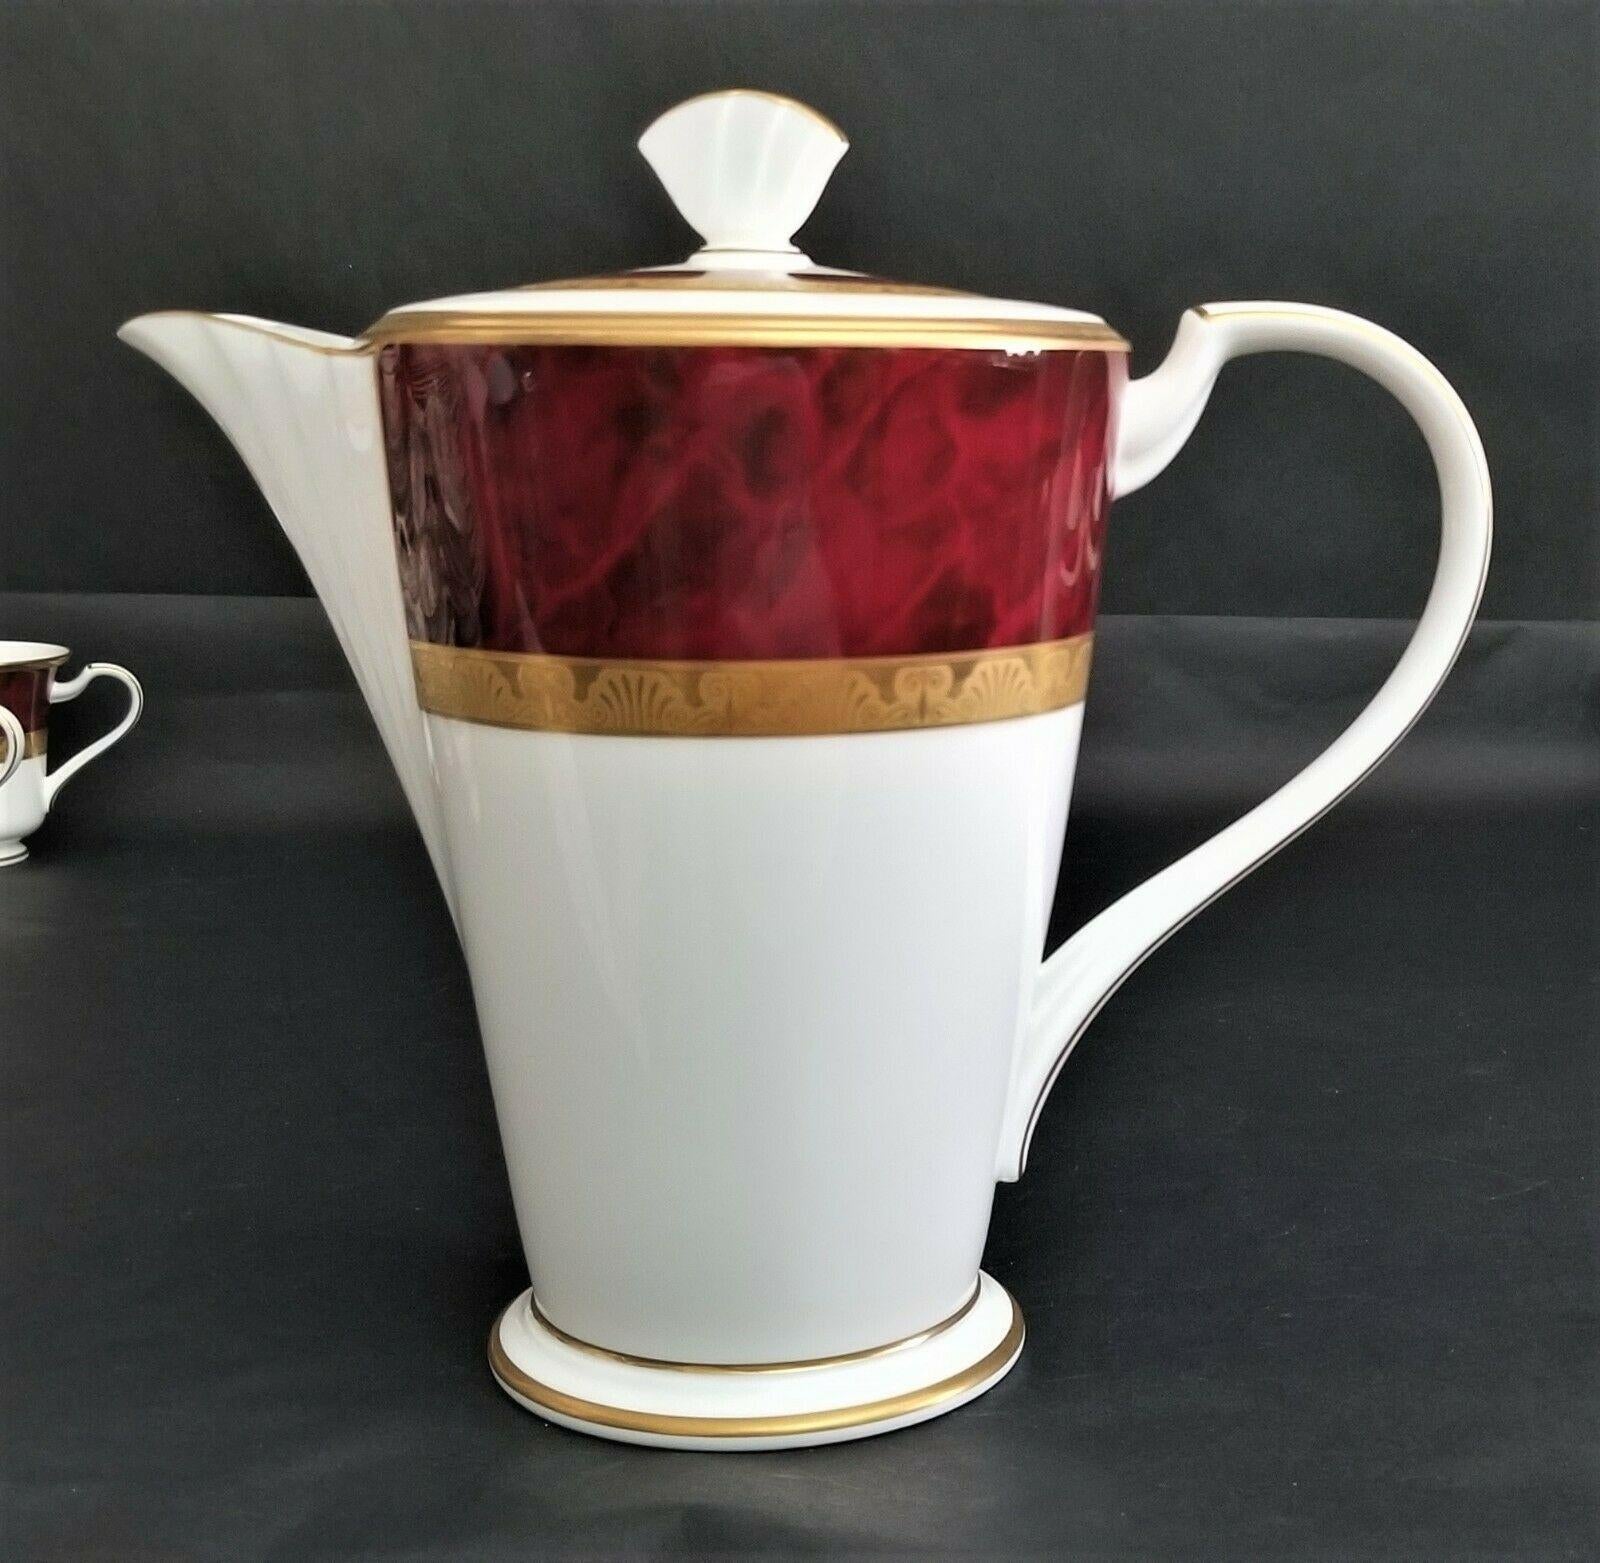 Offering One Of Our Recent Palm Beach Estate Fine China Acquisitions Of 
(1) NORITAKE Hemingway Bone China Coffee Tea Pot with Lid

We have other matching pieces in this pattern listed separately including some coffee cups and vegetable